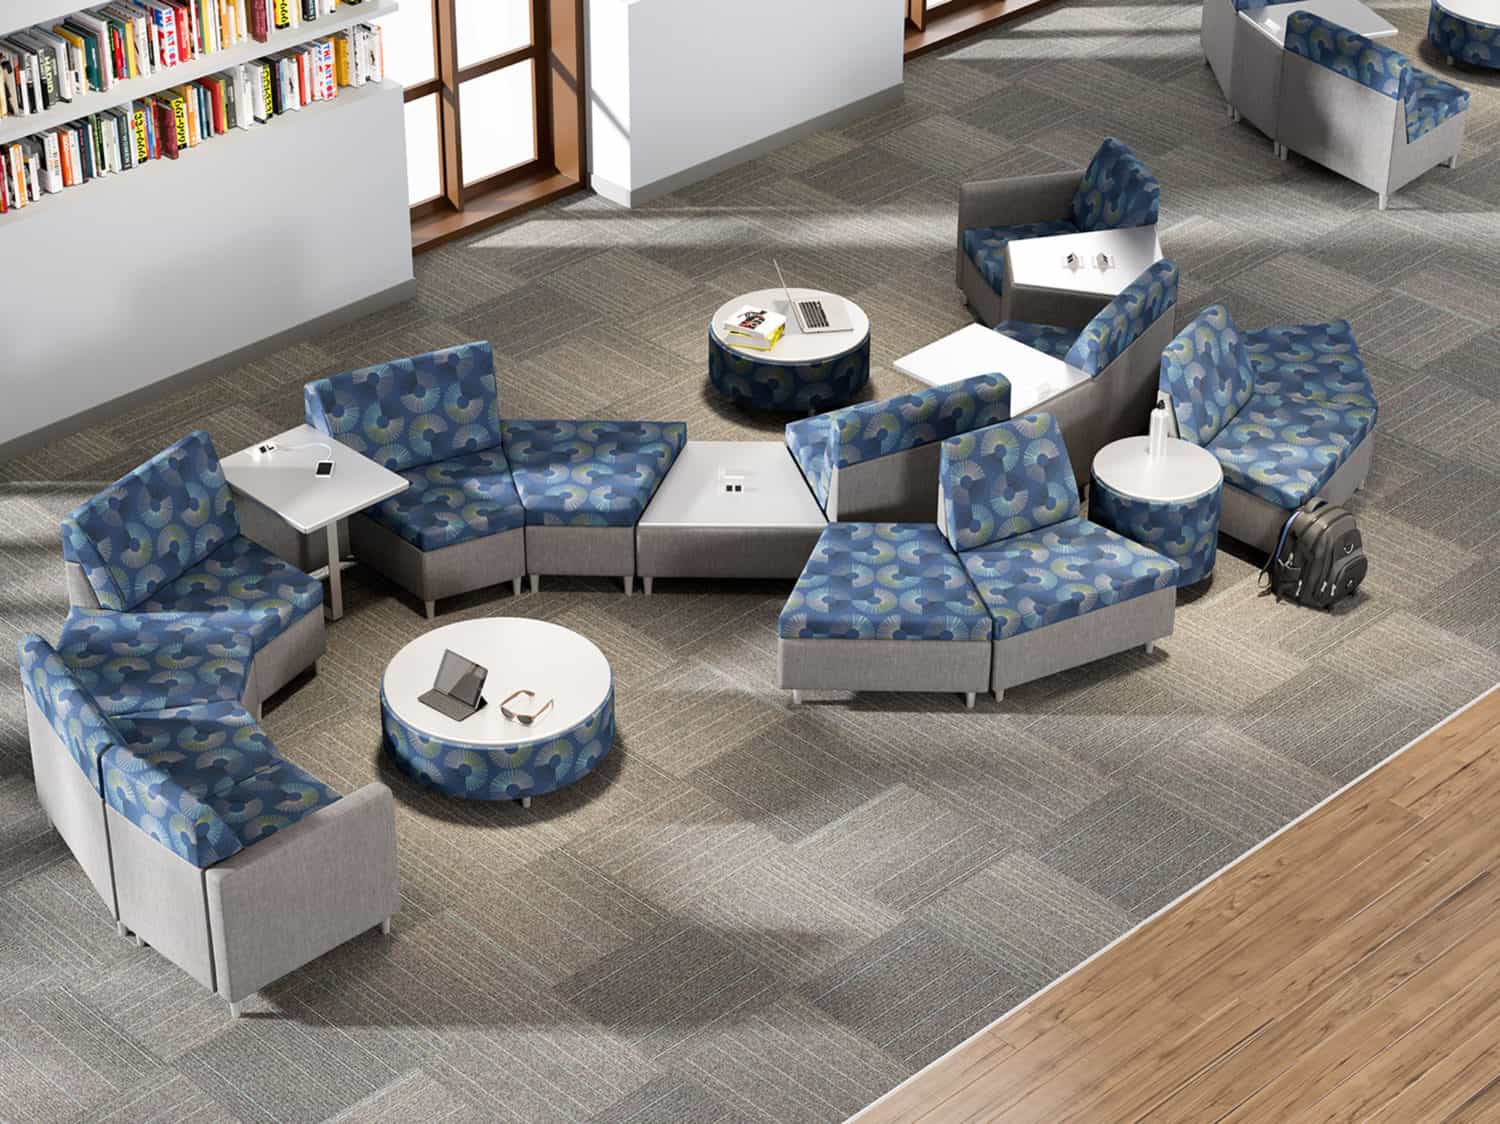 Rally Wedges in library setting, with power and ottomans